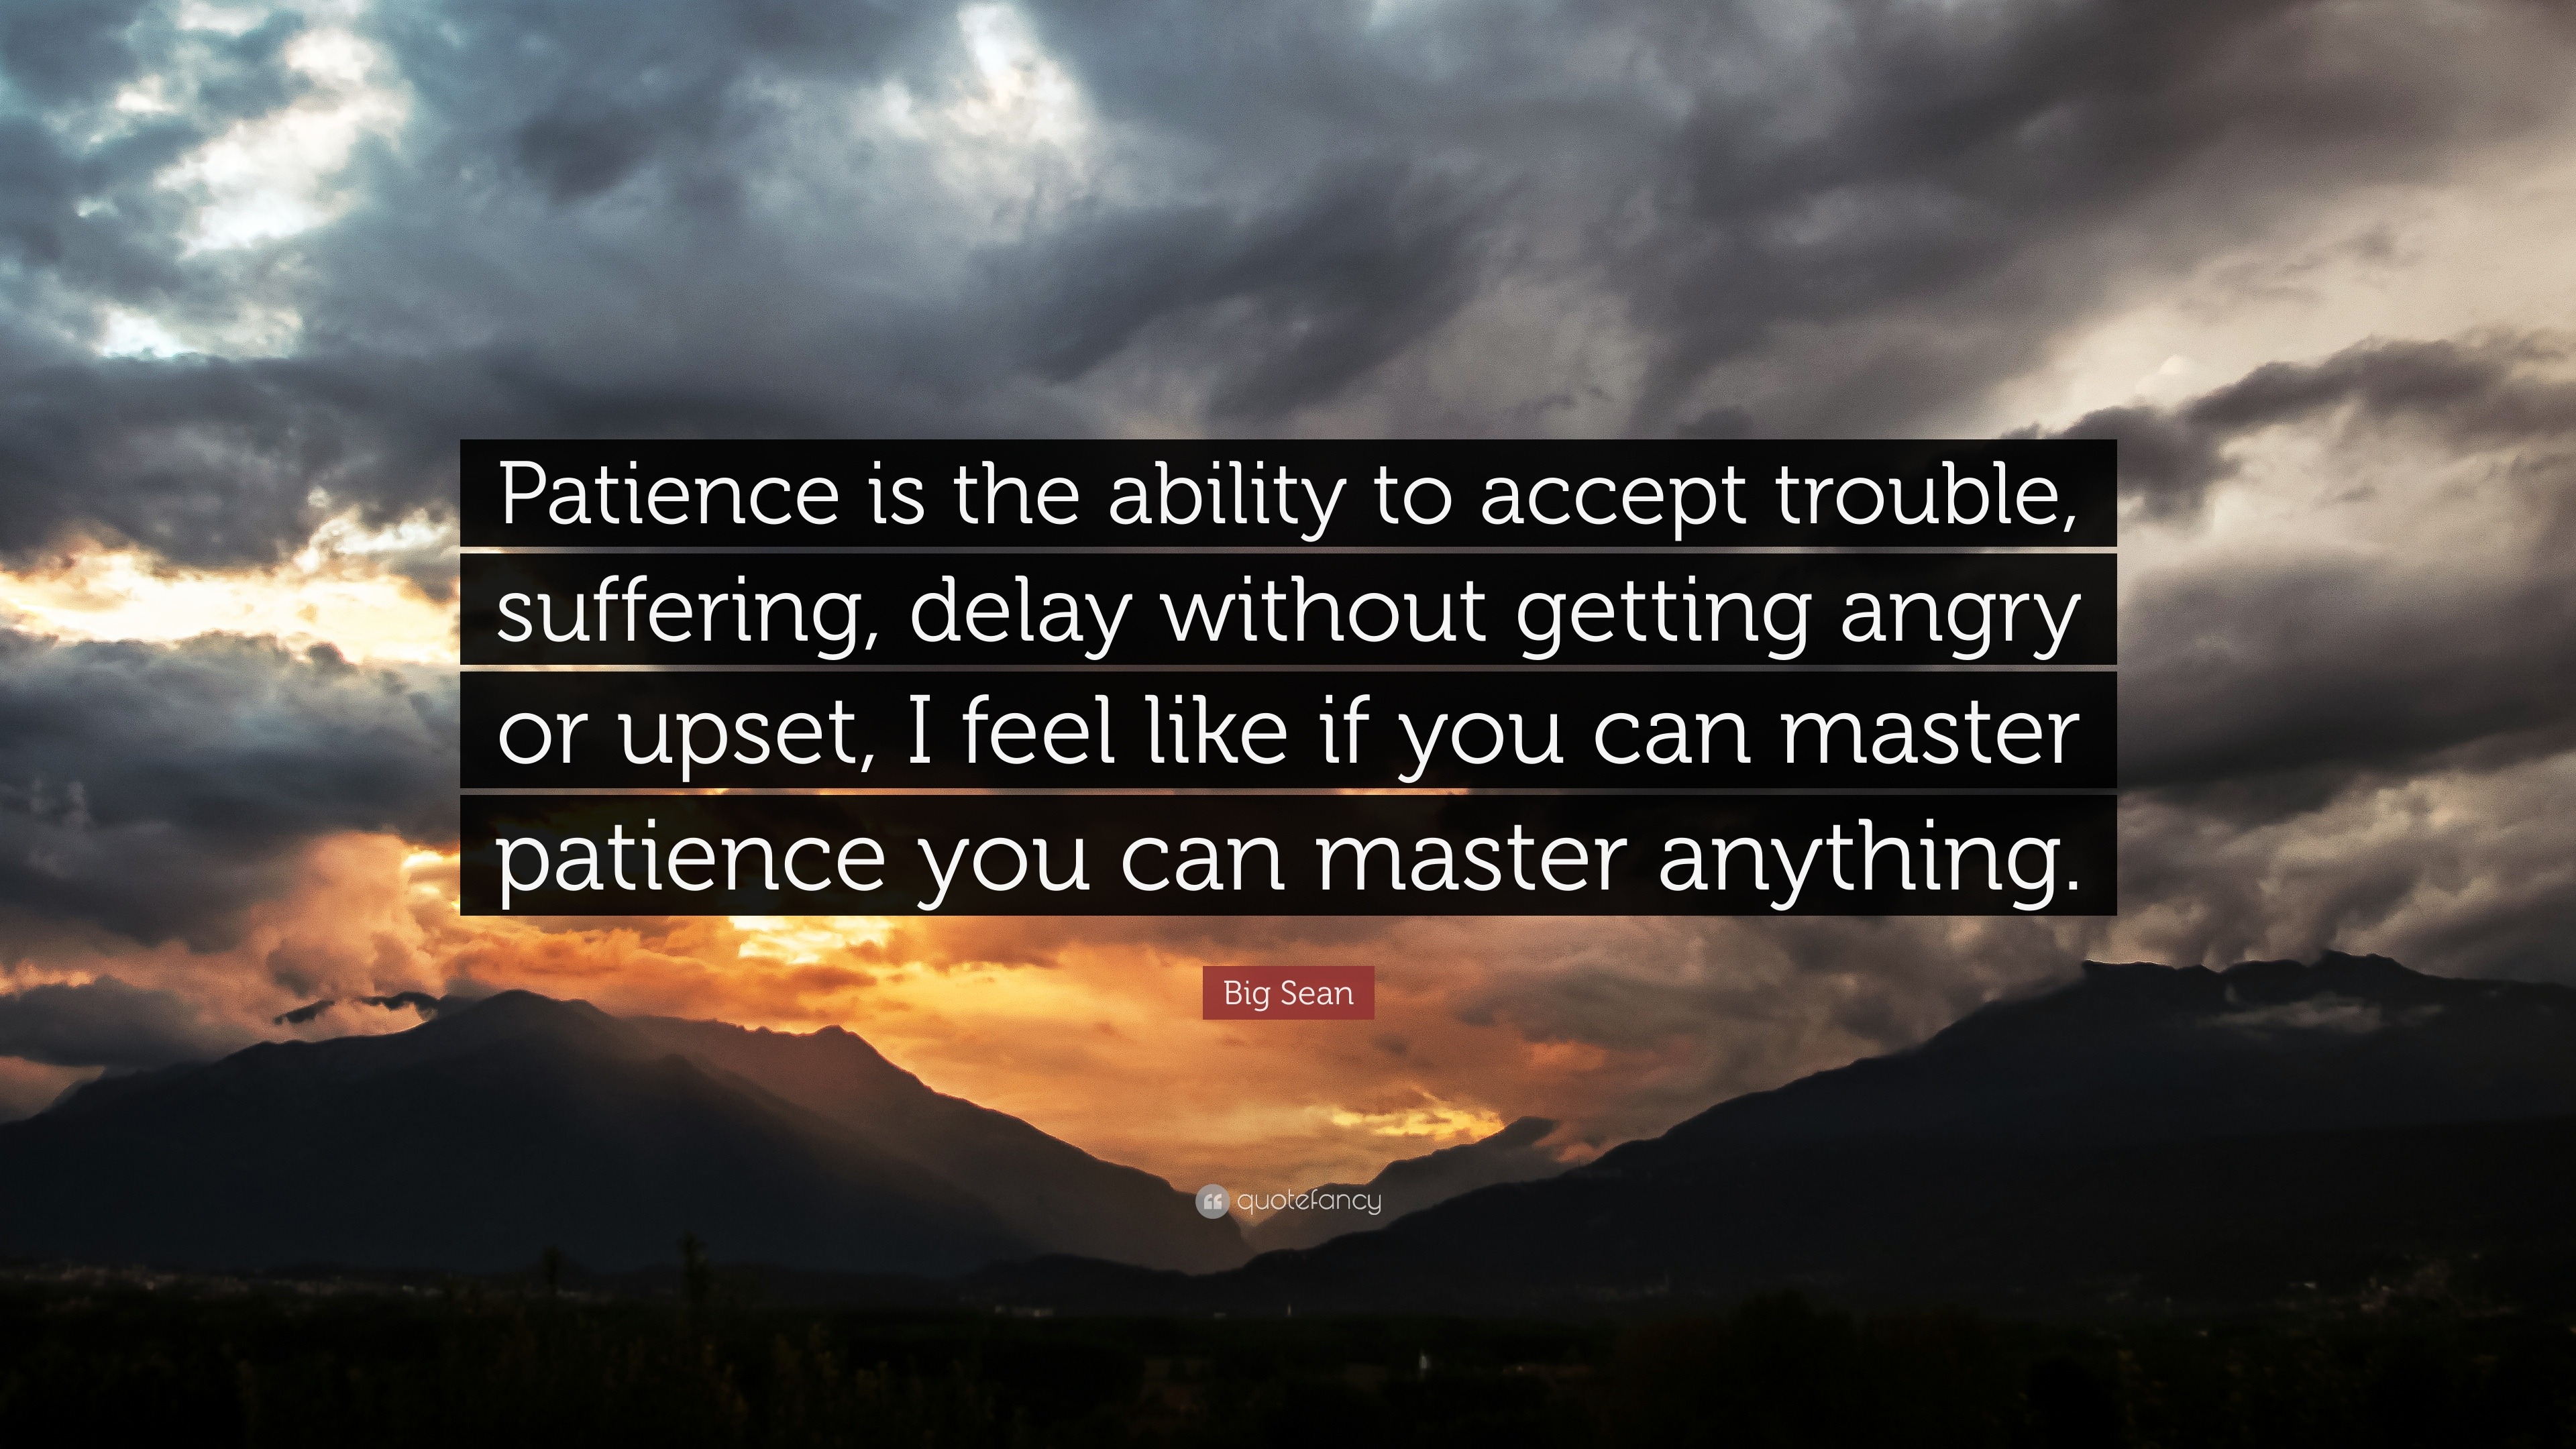 Big Sean Quote: “Patience is the ability to accept trouble, suffering ...